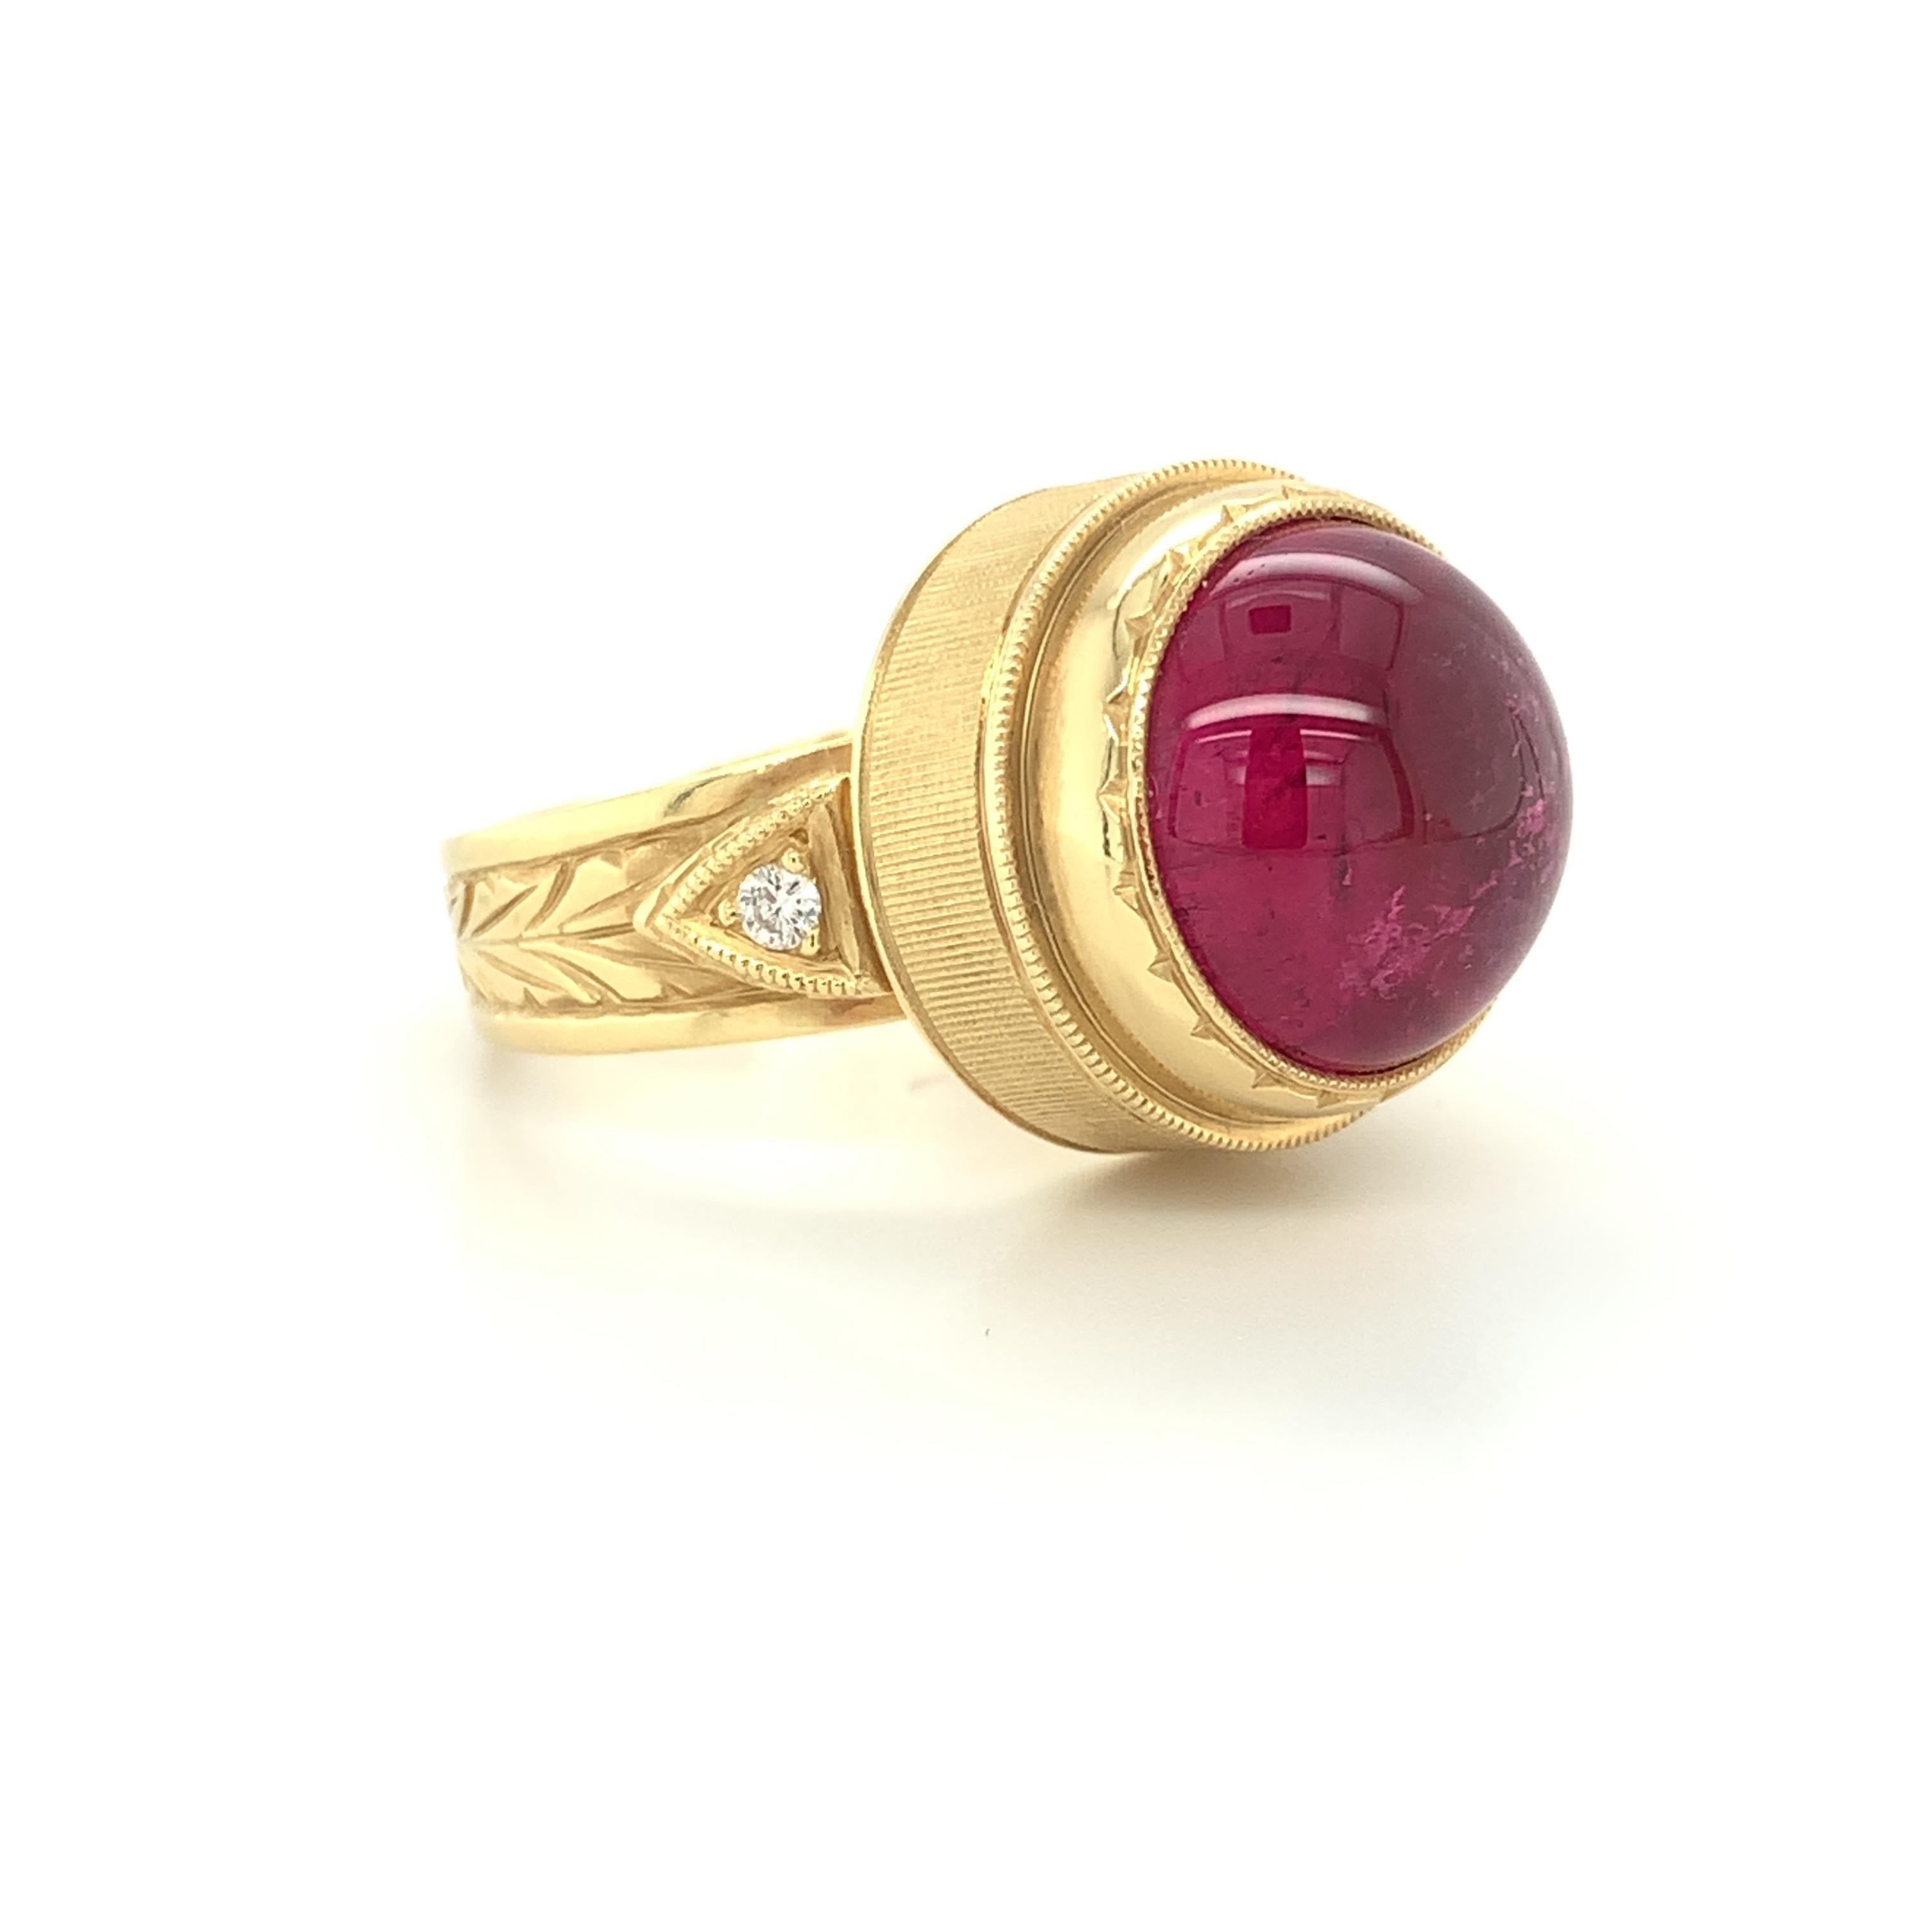 10.75 Carat Rubellite Tourmaline Cabochon and Diamond Engraved Band Ring  In New Condition For Sale In Los Angeles, CA